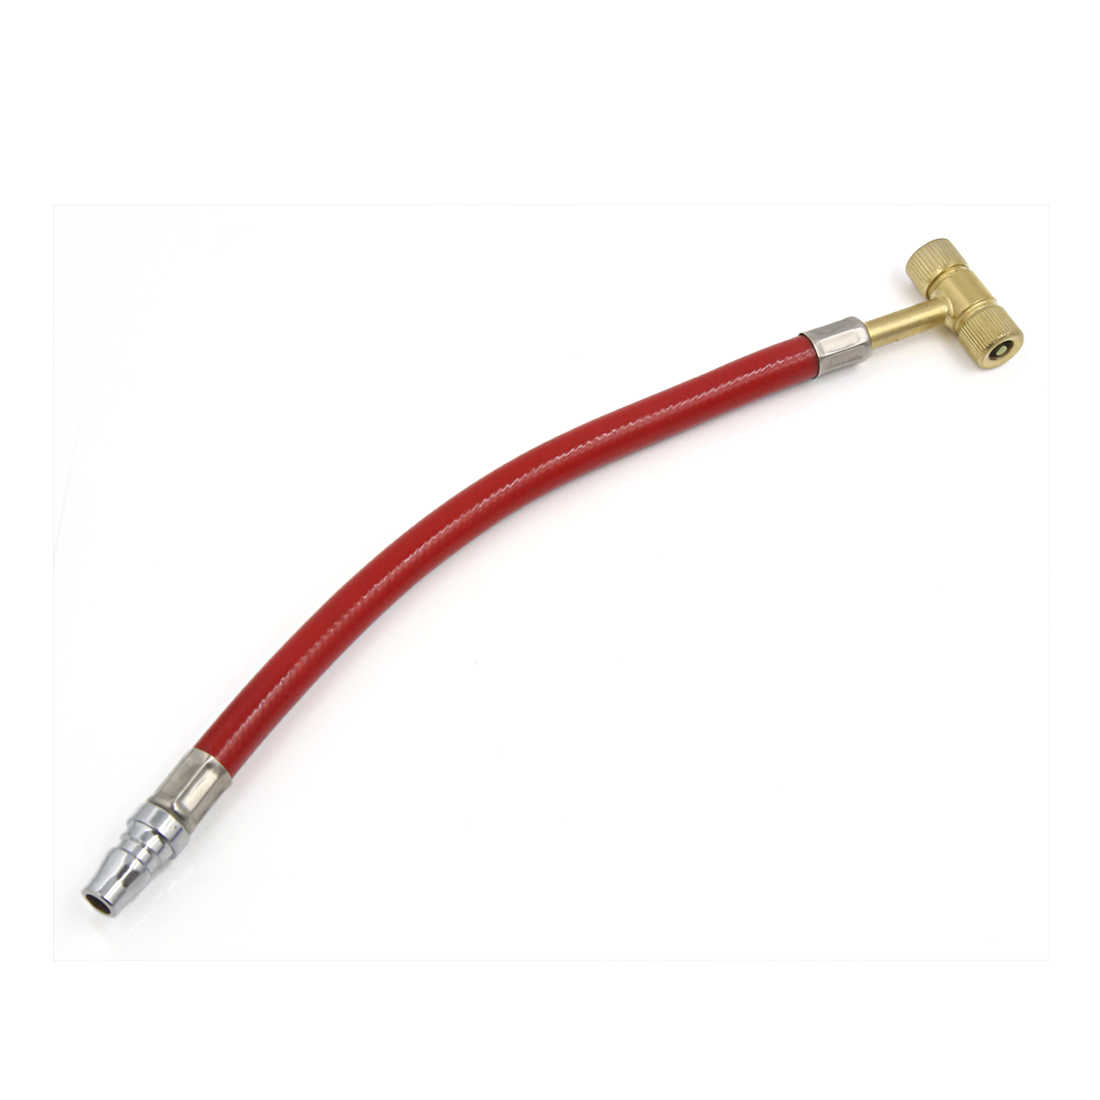 32cm Length Rubber Metal Dual Head Air Tire Tyre Inflator Pump Hose Red for Car